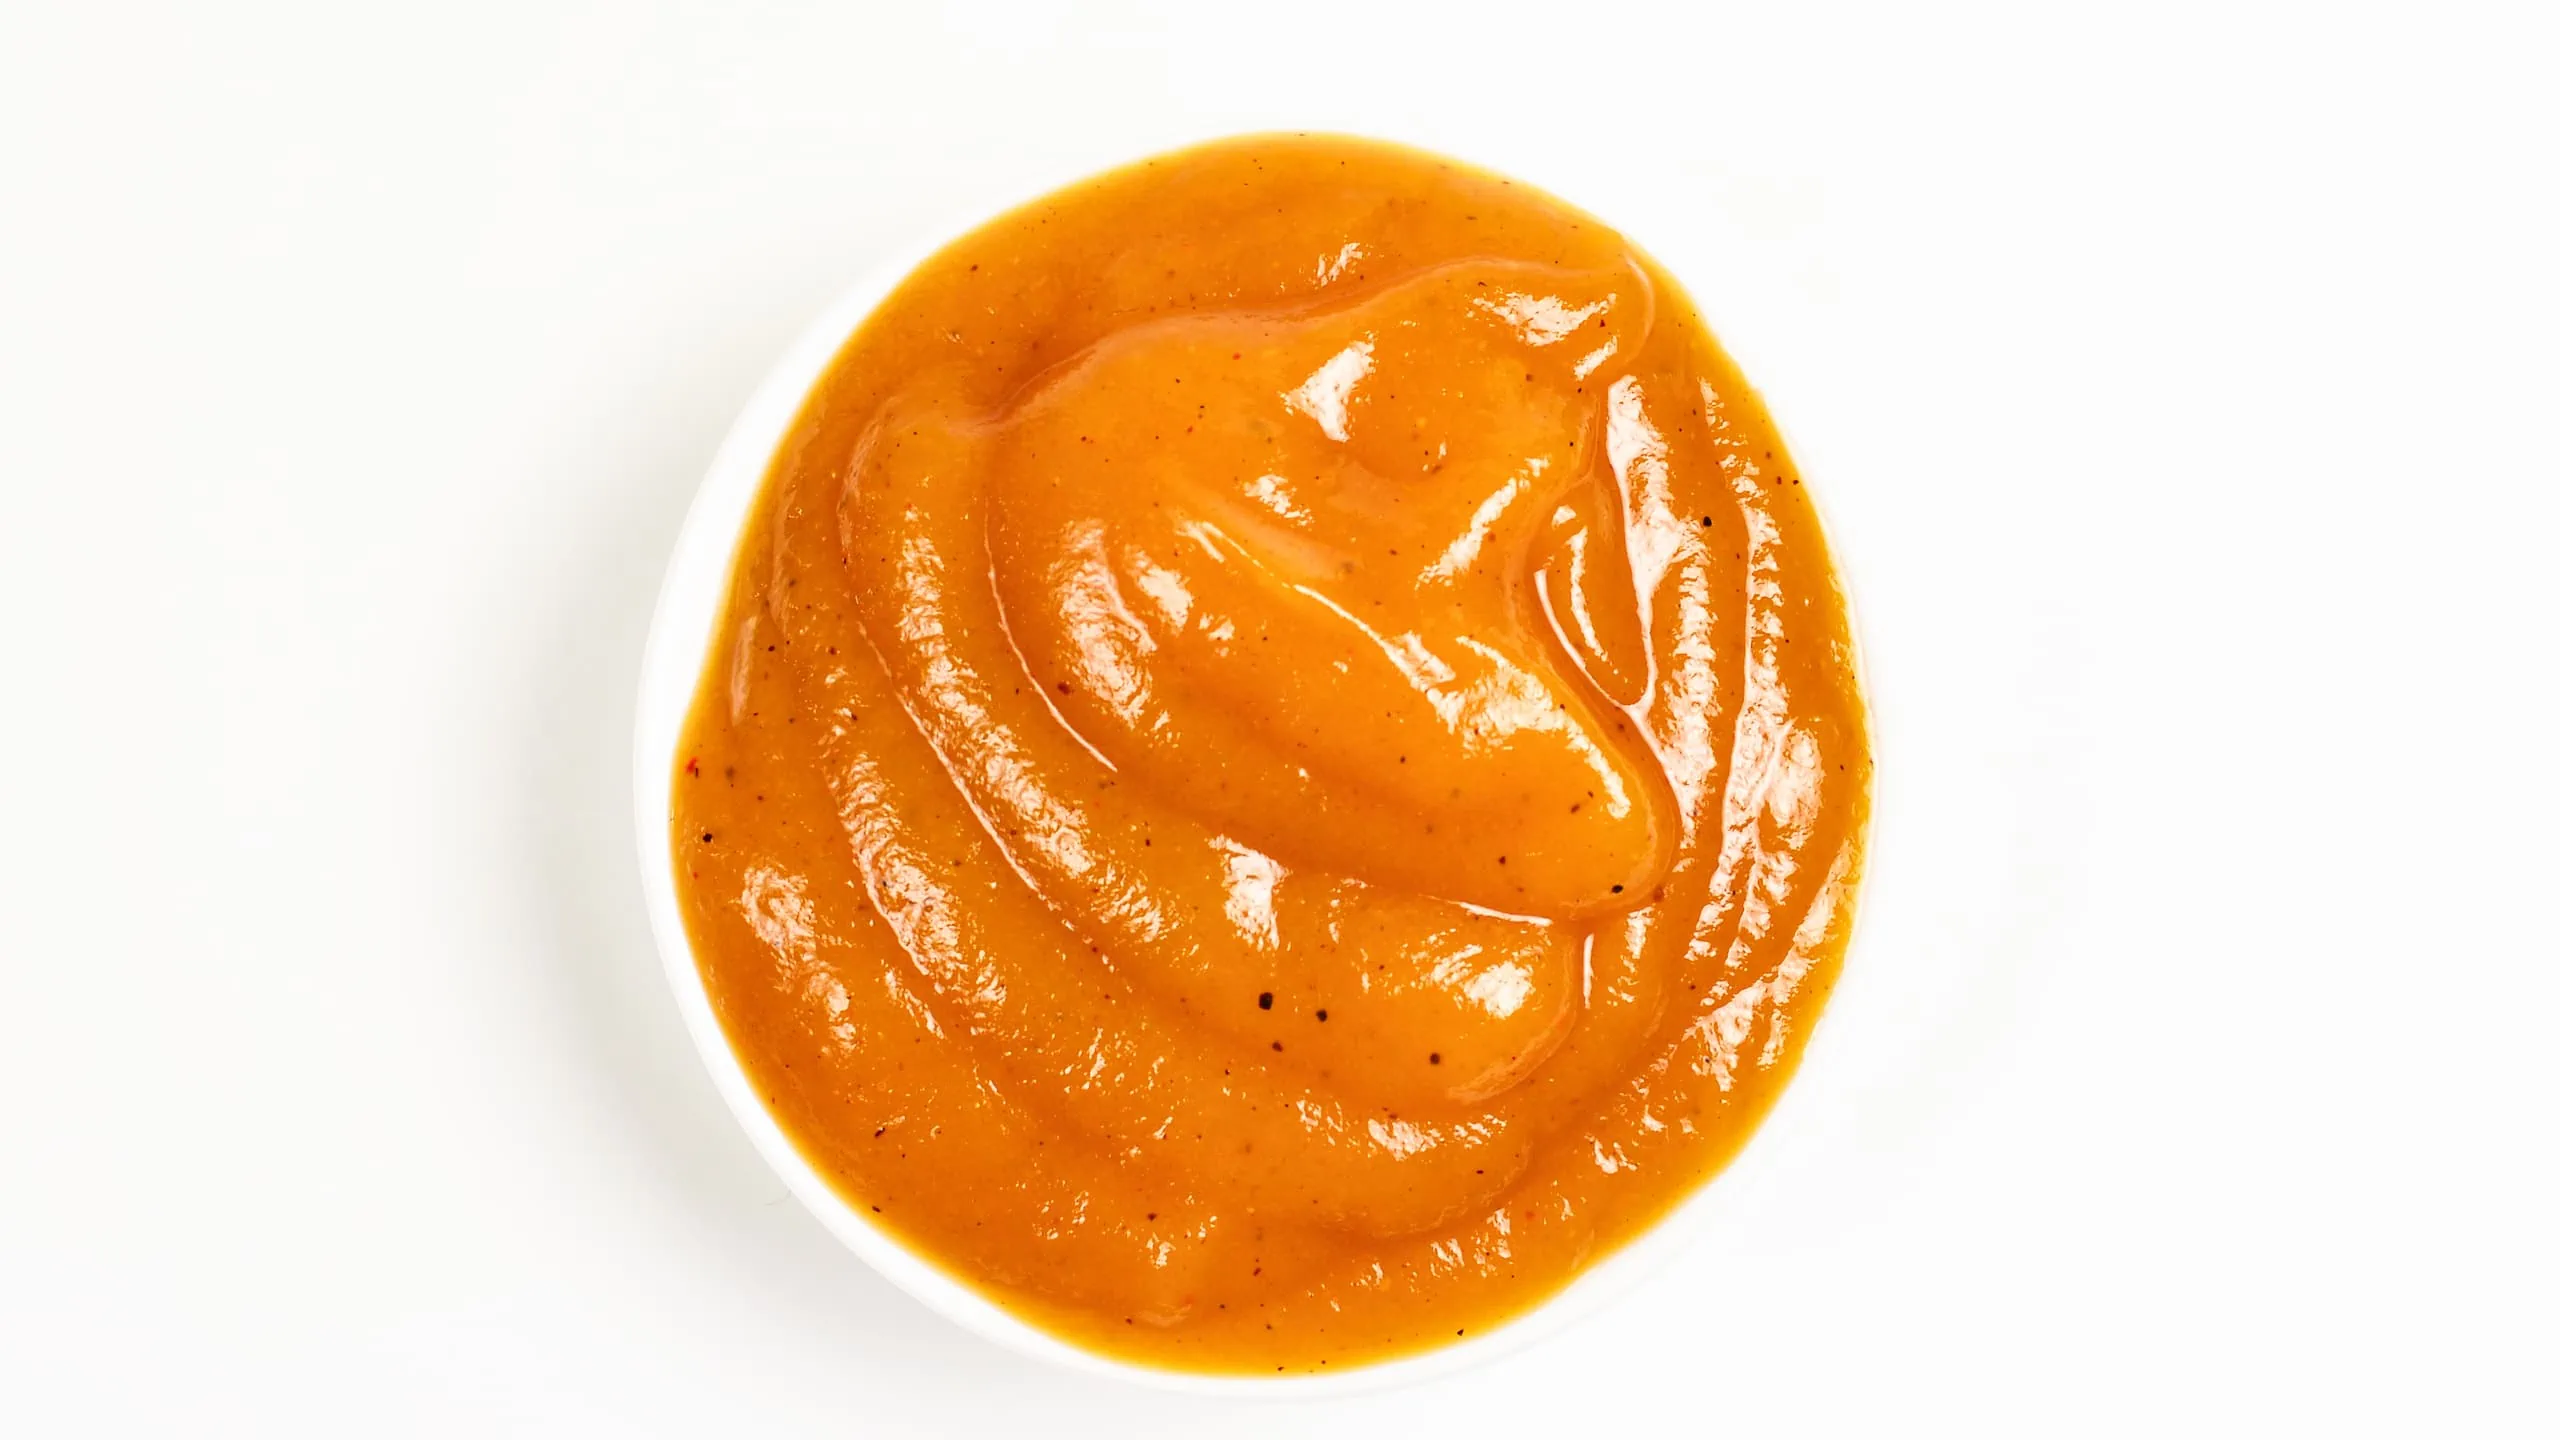 Spicy Taco Bell Chipotle sauce recipe